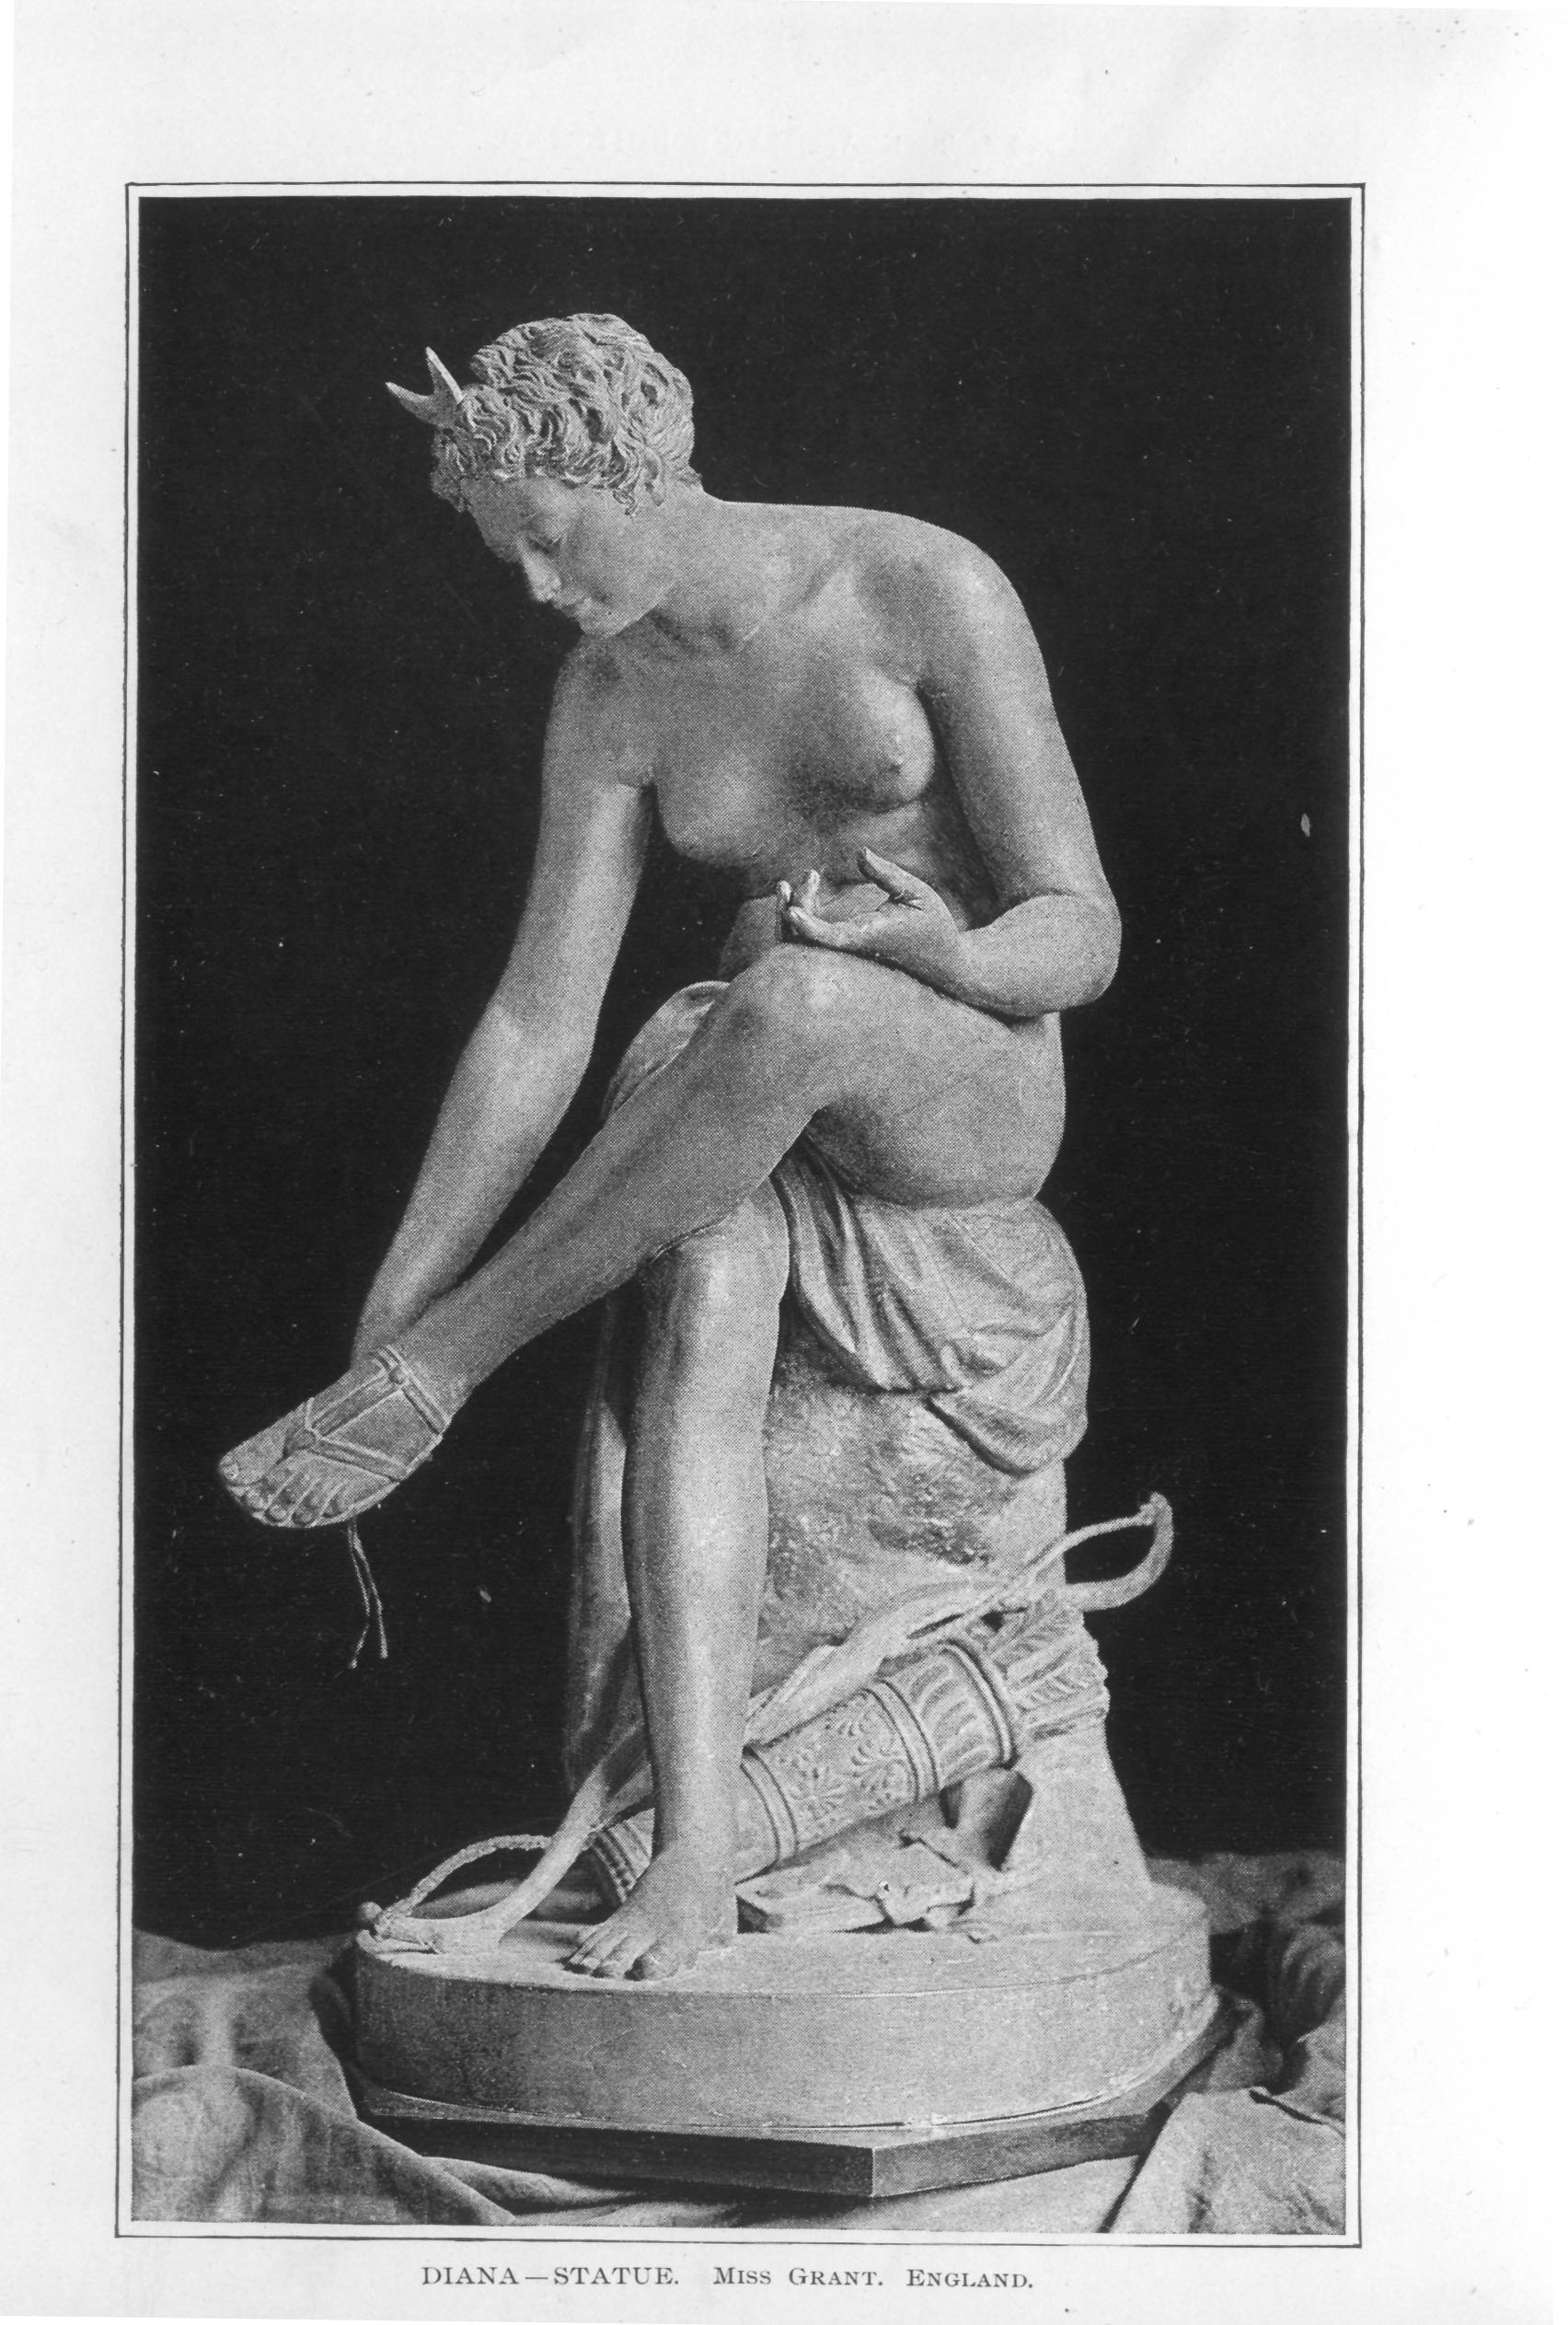 nude statue of Diana sitting with her bow and quiver full of arrows by her feet